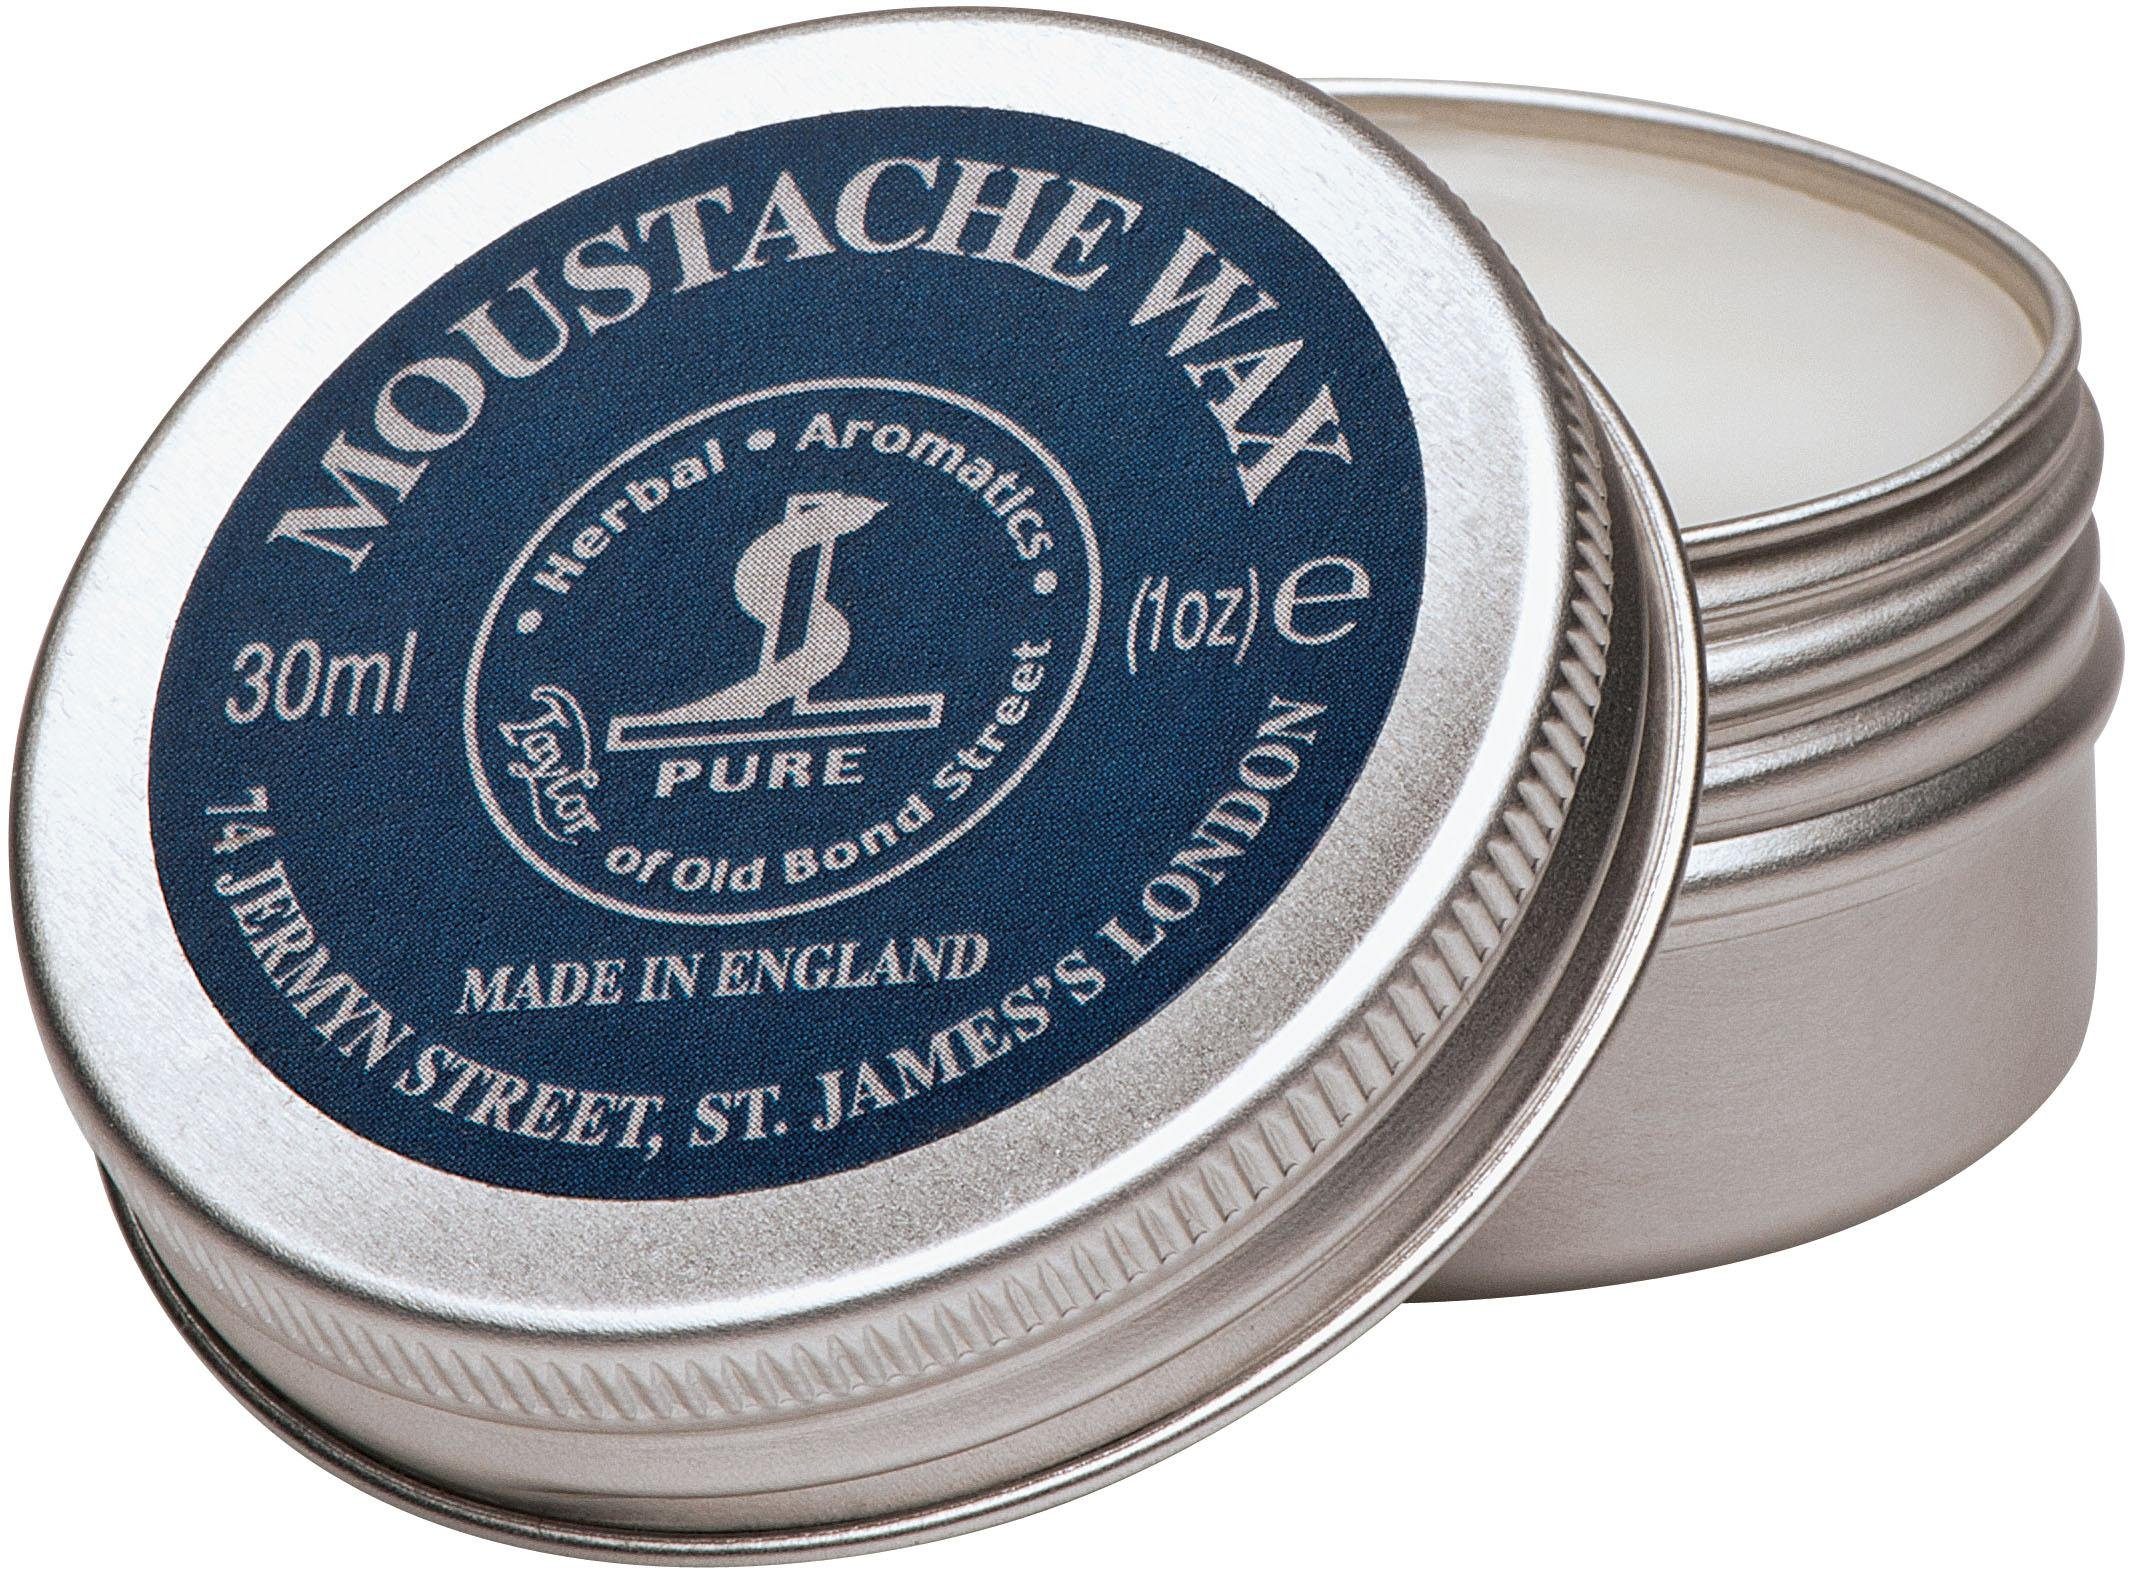 Bartwachs Old Street Taylor Moustache Wax, Bartstyling, Bond of Bartpomade